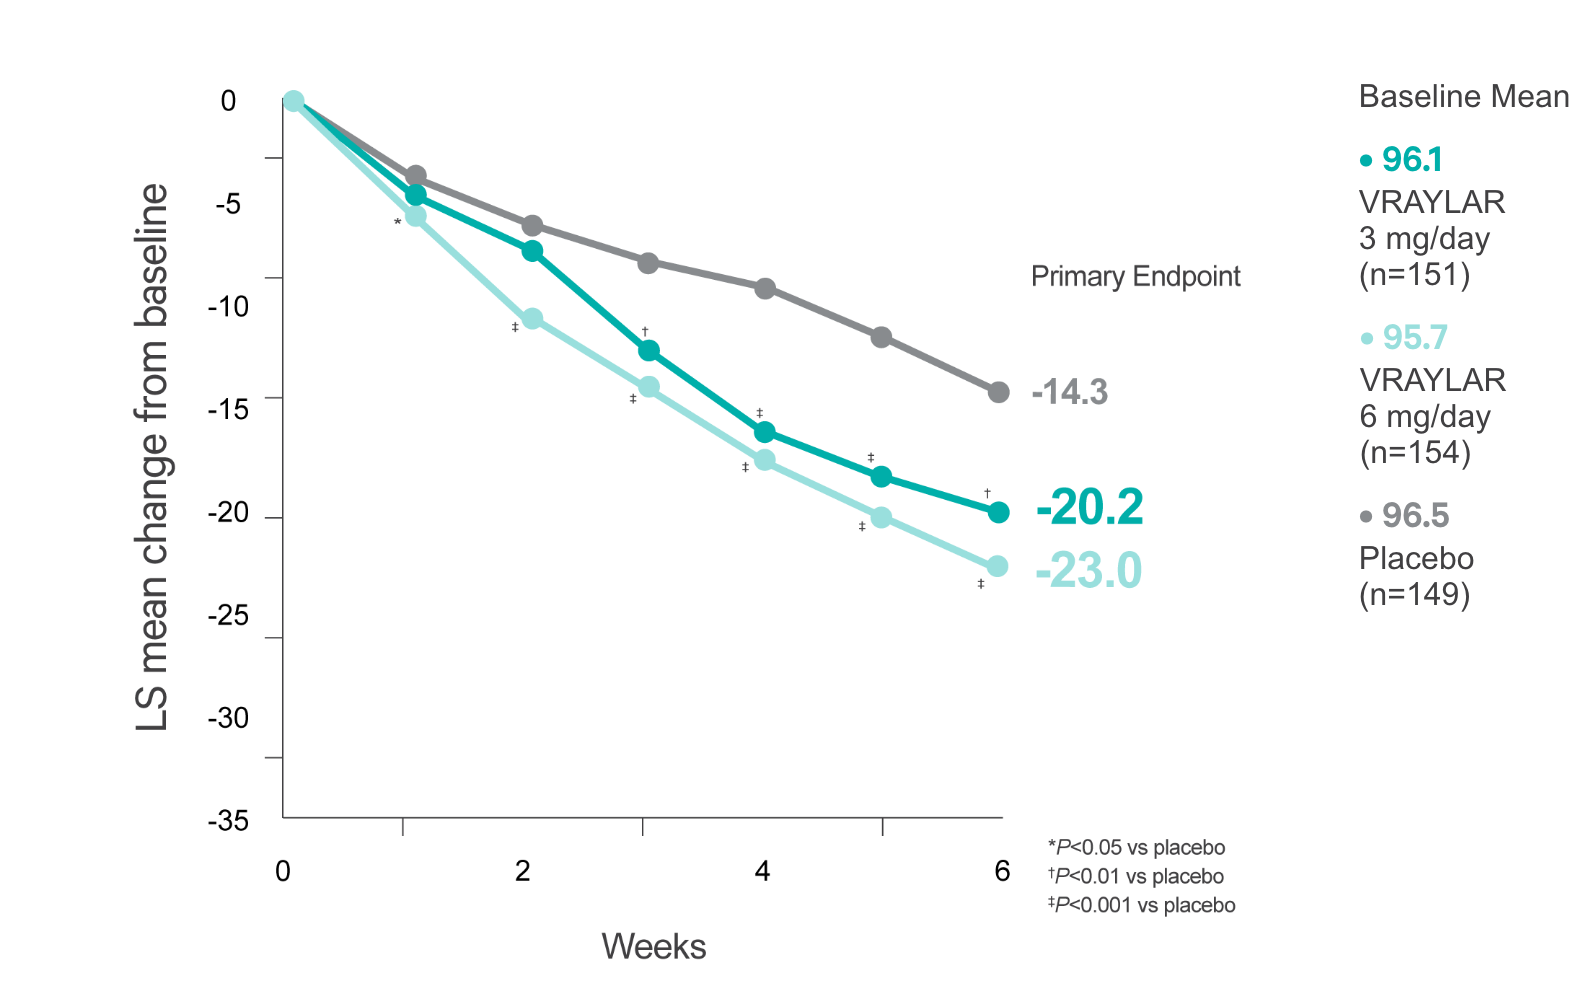 Graph showing change in PANSS total score in VRAYLAR vs placebo for schizophrenia in study 2.